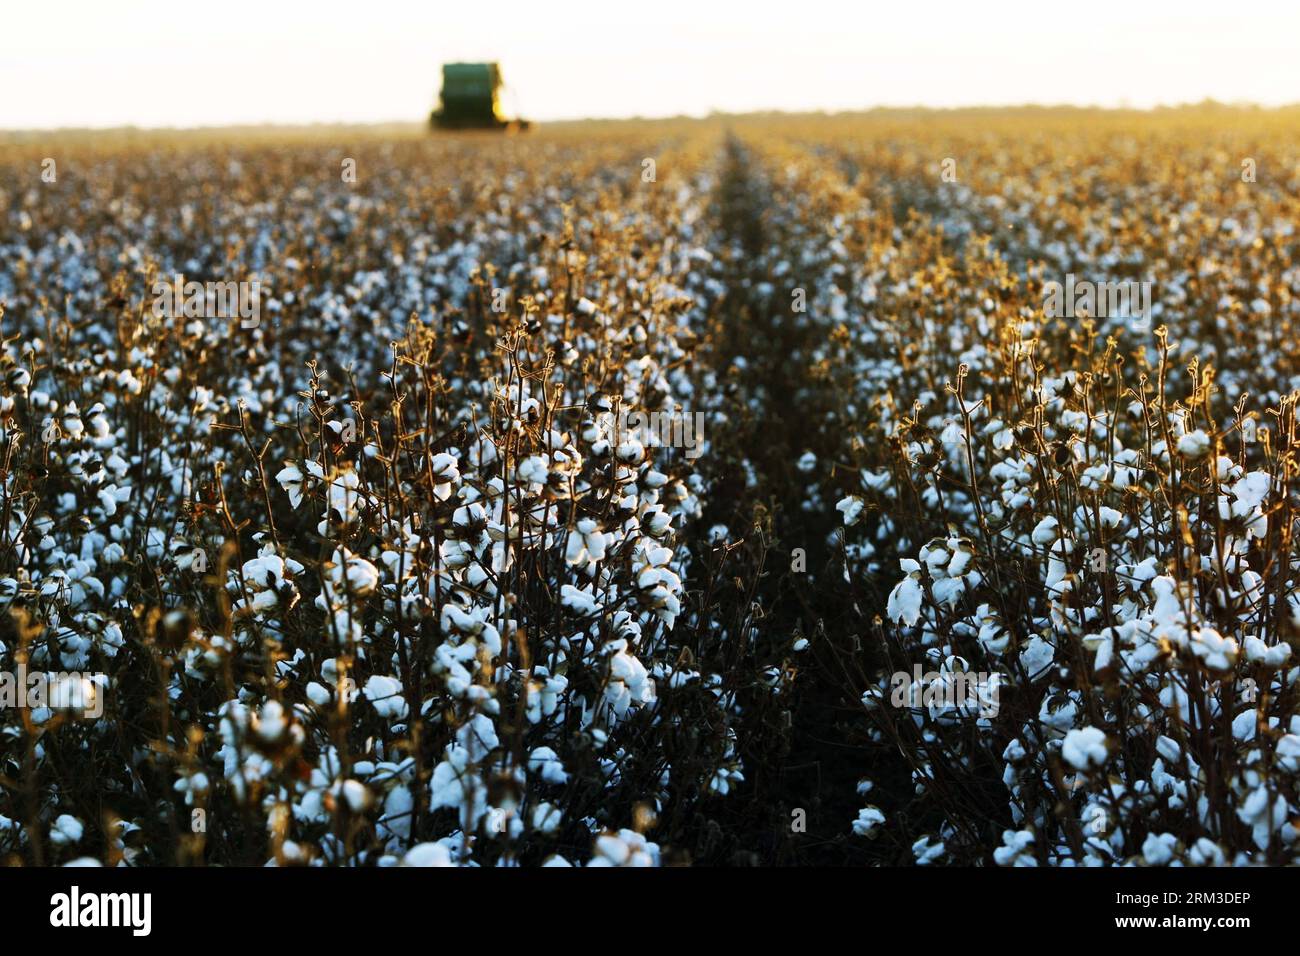 Bildnummer: 60154768  Datum: 17.07.2013  Copyright: imago/Xinhua SYDNEY, July 17 2013 - A worker drives a cotton-harvesting machine at UNIBALE, a subsidiary of Chinatex Corporation, in Moree, New South Wales, Australia, on July 17, 2013. Chinatex Corporation purchased the cotton base to plant cotton in Moree in early 1990s. The base, covering an area of 5,200 hectares, owns the anual productivity of more than 2,700,000 kg unginned cotton and provides mainly for Chinatex Corporation and partly for international market. (Xinhua/Jin Linpeng) (lr) AUSTRALIA-NEW SOUTH WALES-MOREE-CHINATEX CORP-COTT Stock Photo